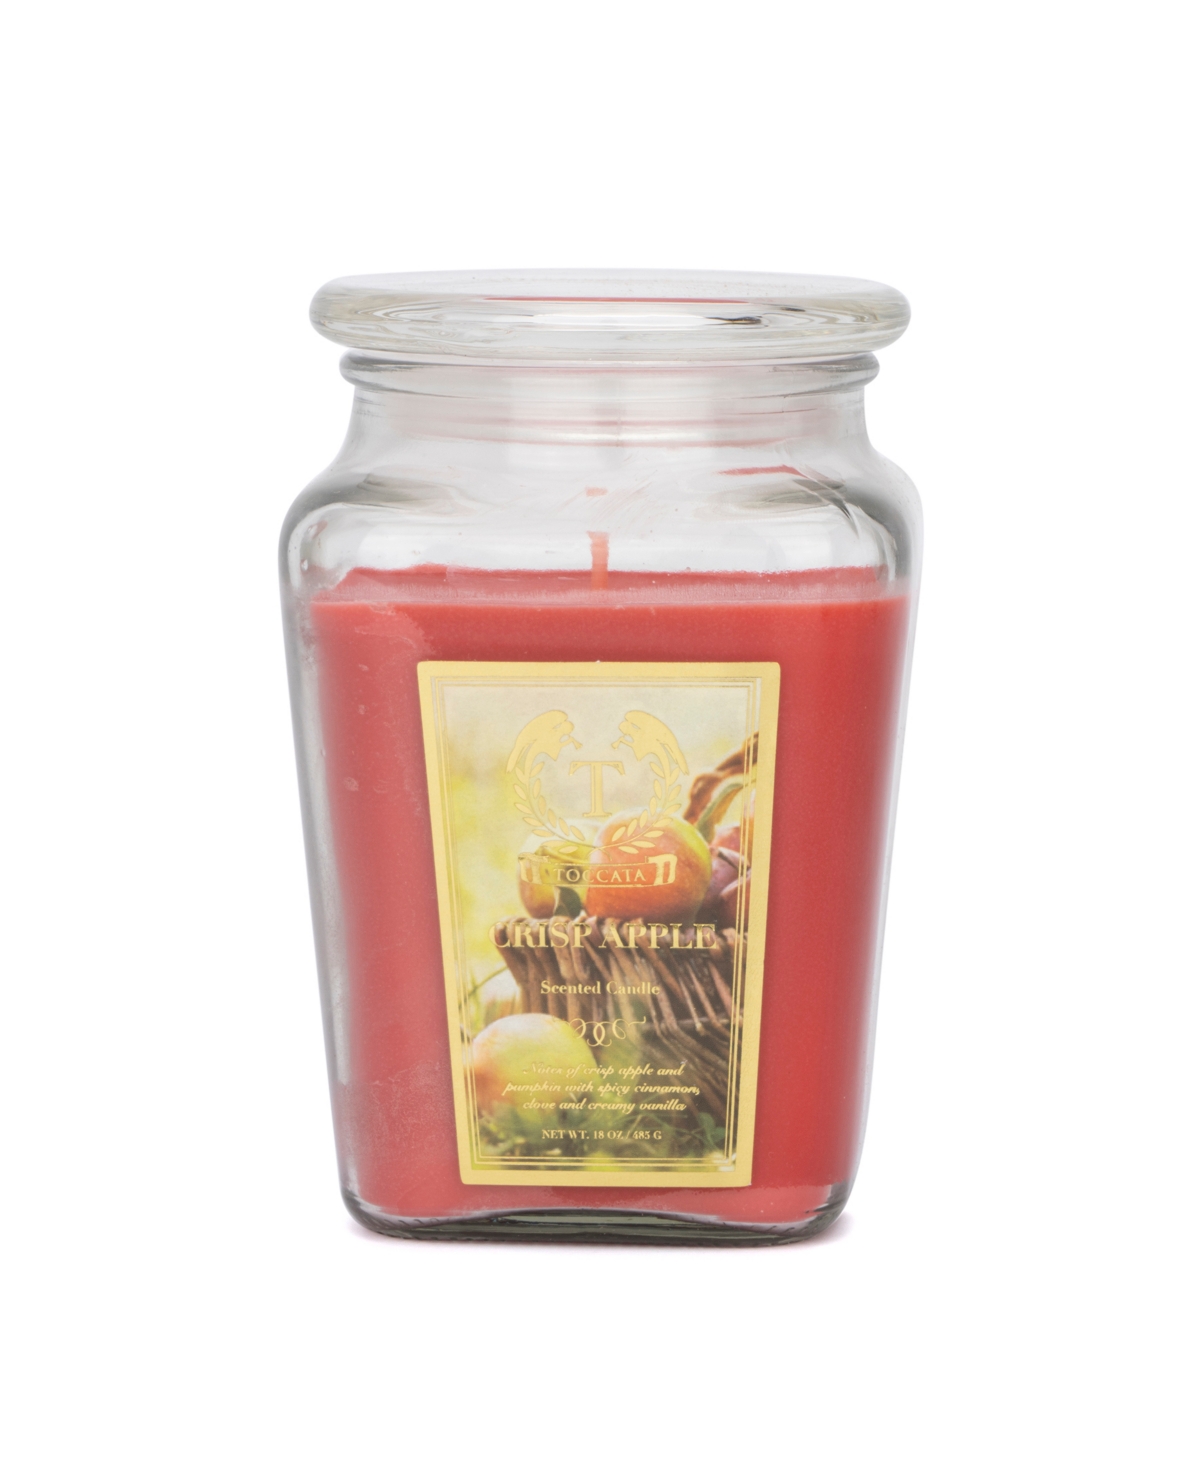 Hybrid & Company Long Lasting Highly Natural Soy Blend Crisp Apple Scented Jar Candle In Red